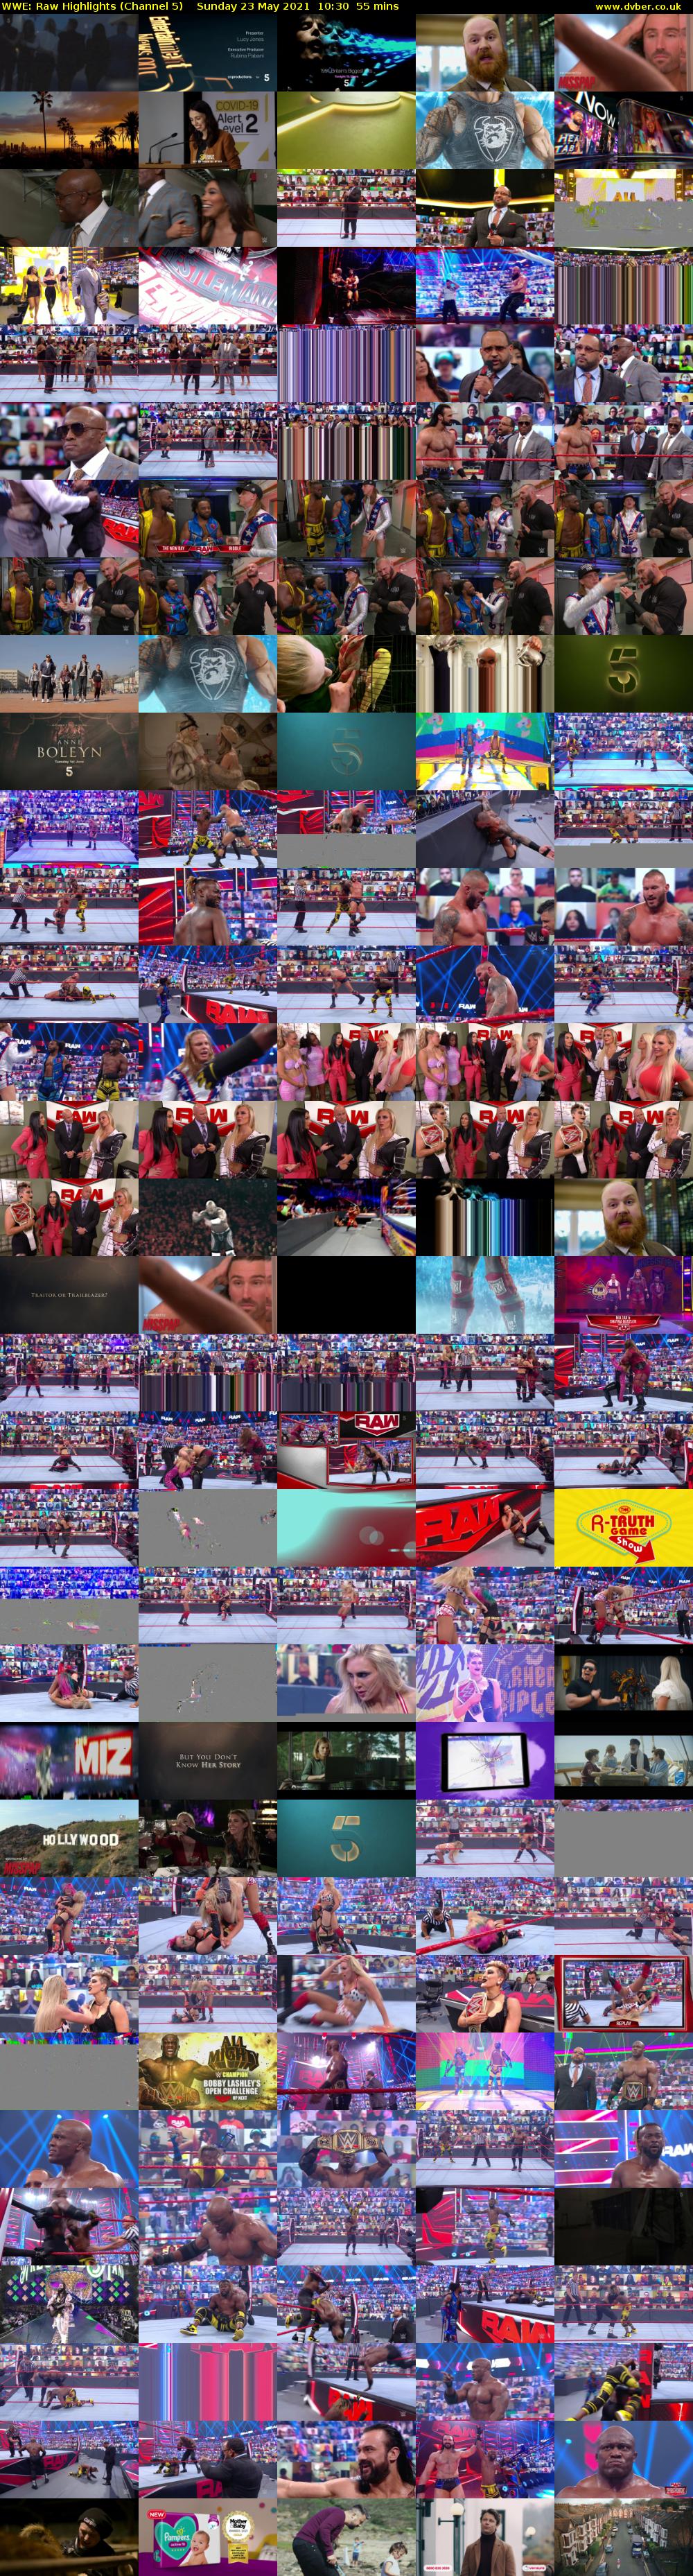 WWE: Raw Highlights (Channel 5) Sunday 23 May 2021 10:30 - 11:25